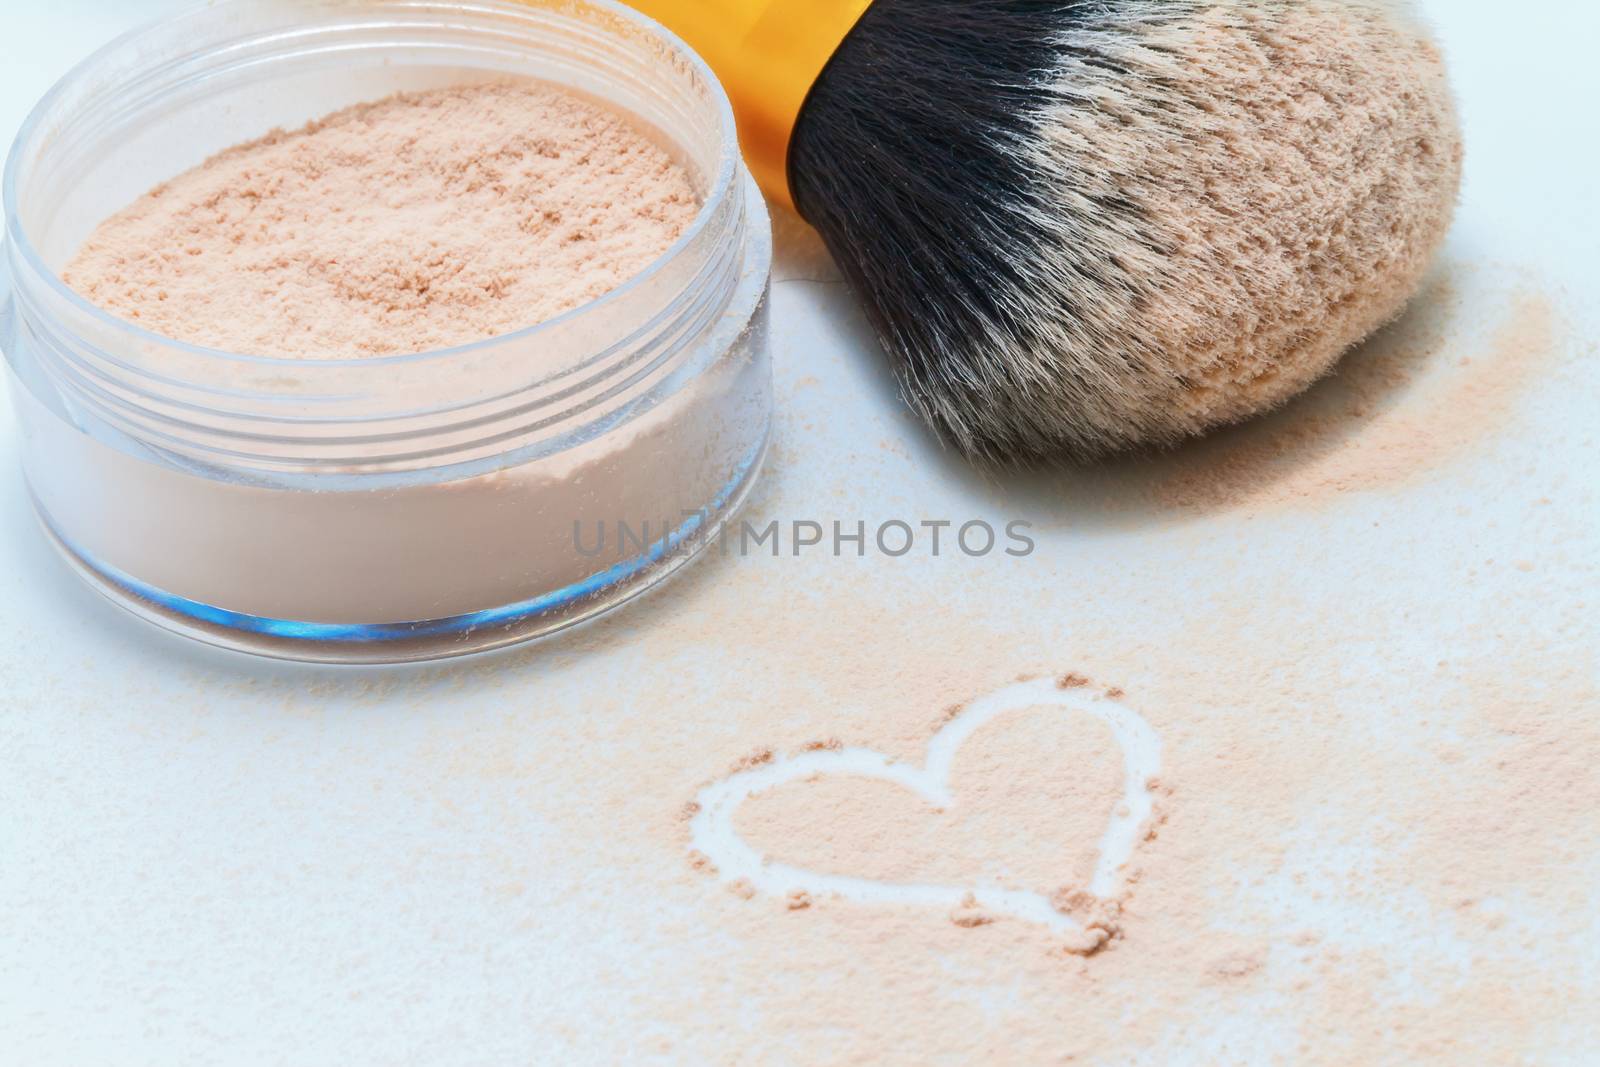 sprinkled powder, brush and drawing heart.